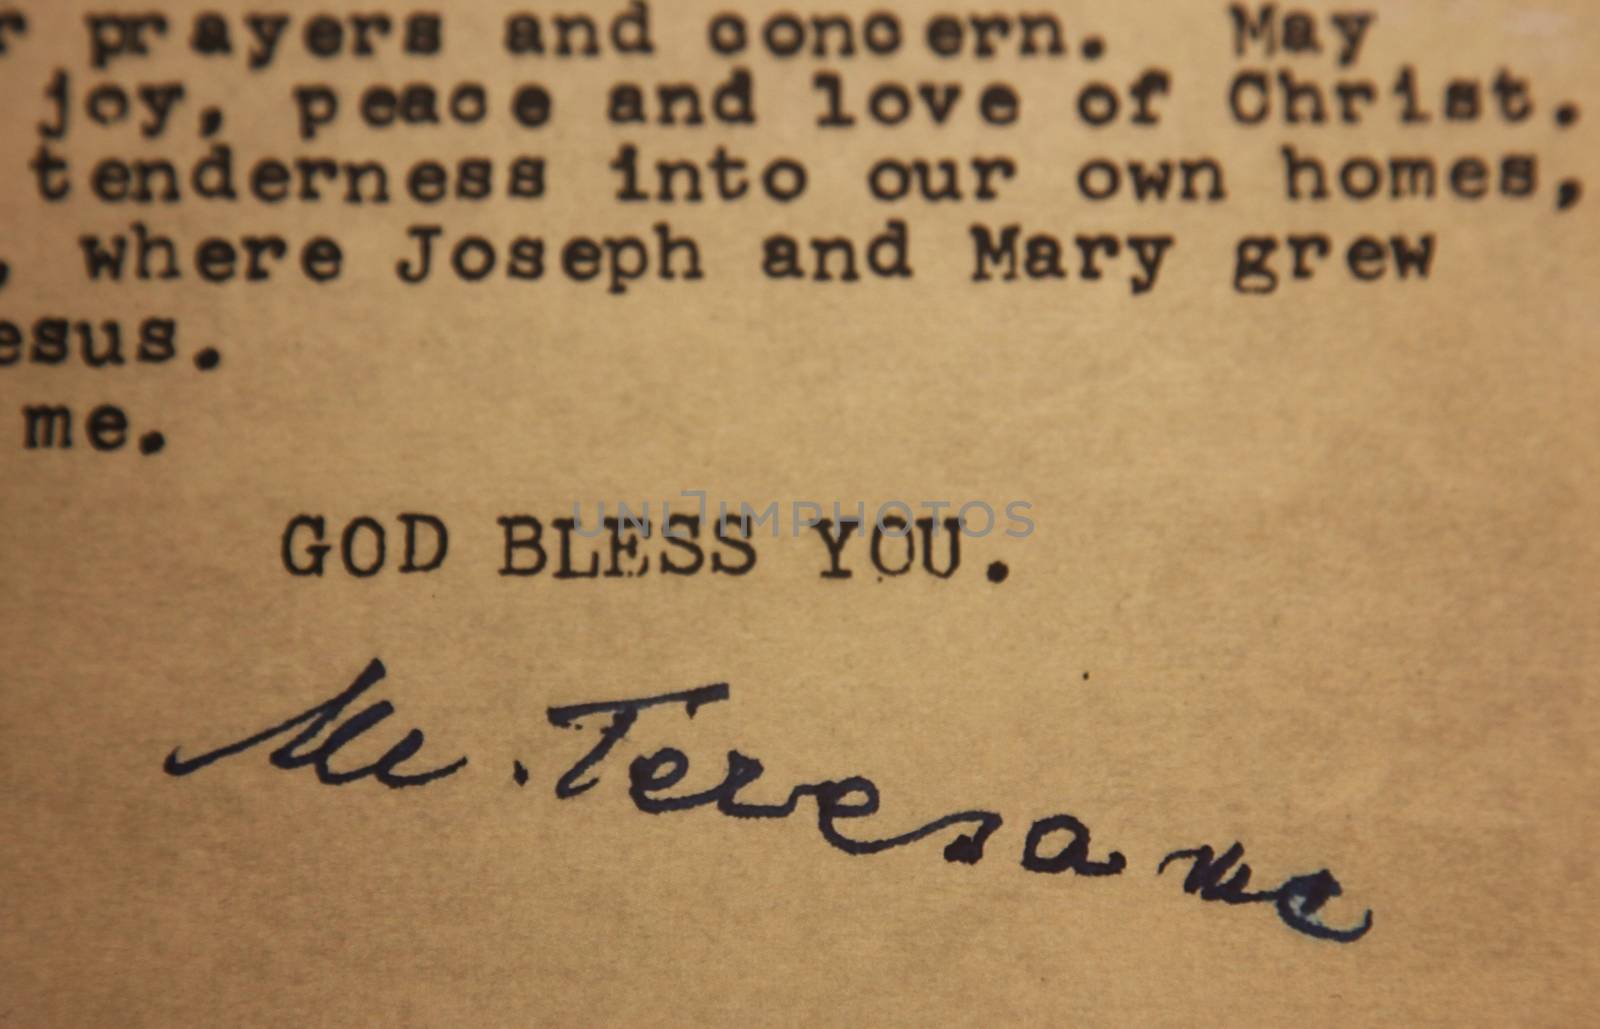 The letter signed by Mother Teresa by atlas